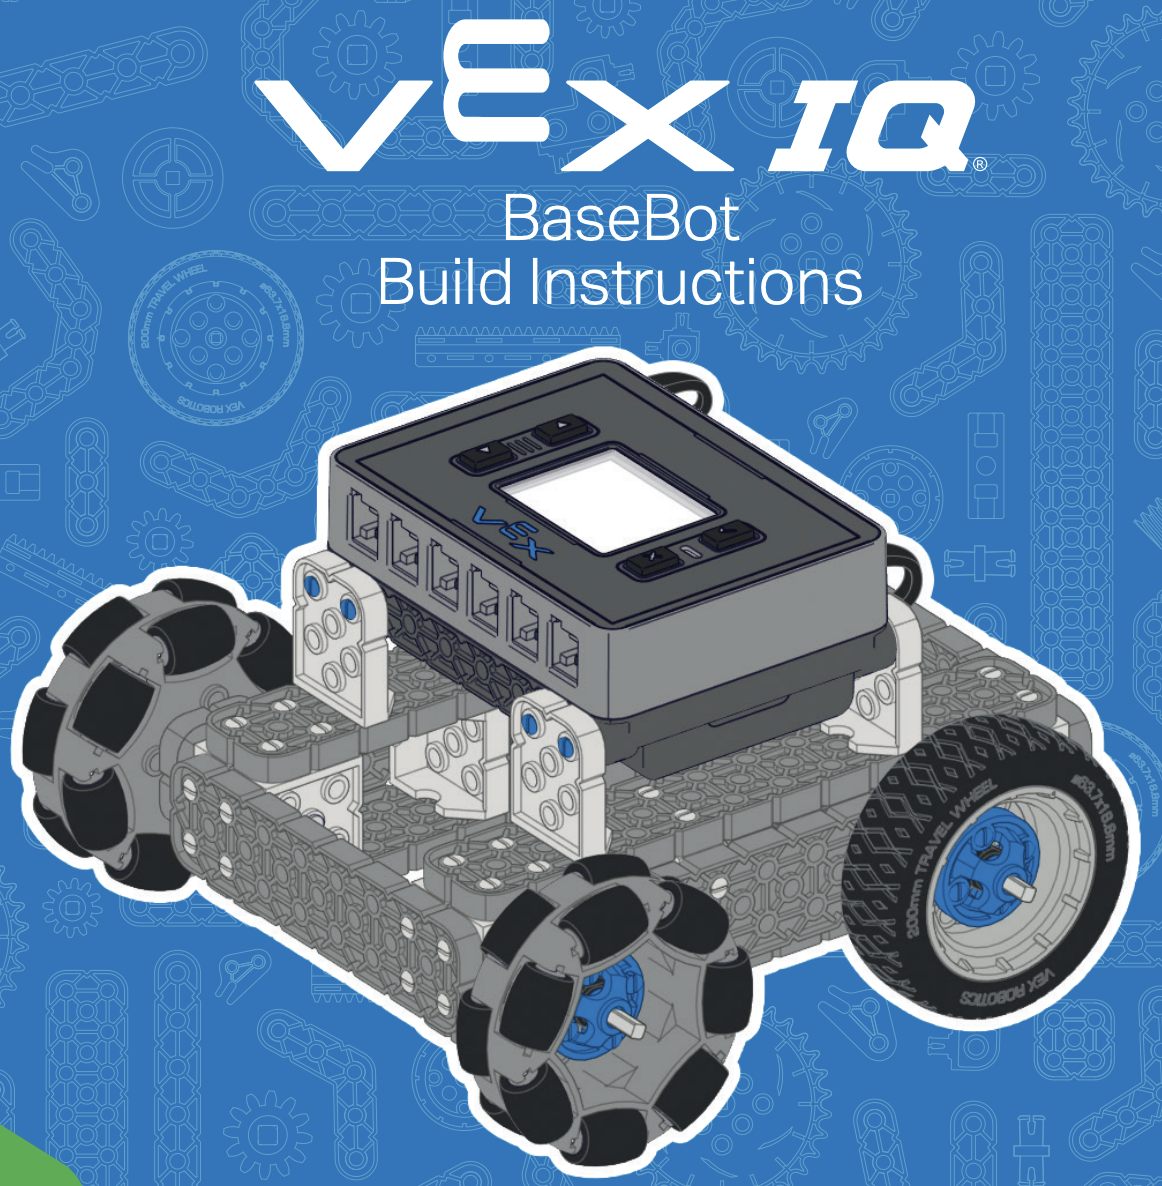 BaseBot build instructions front page